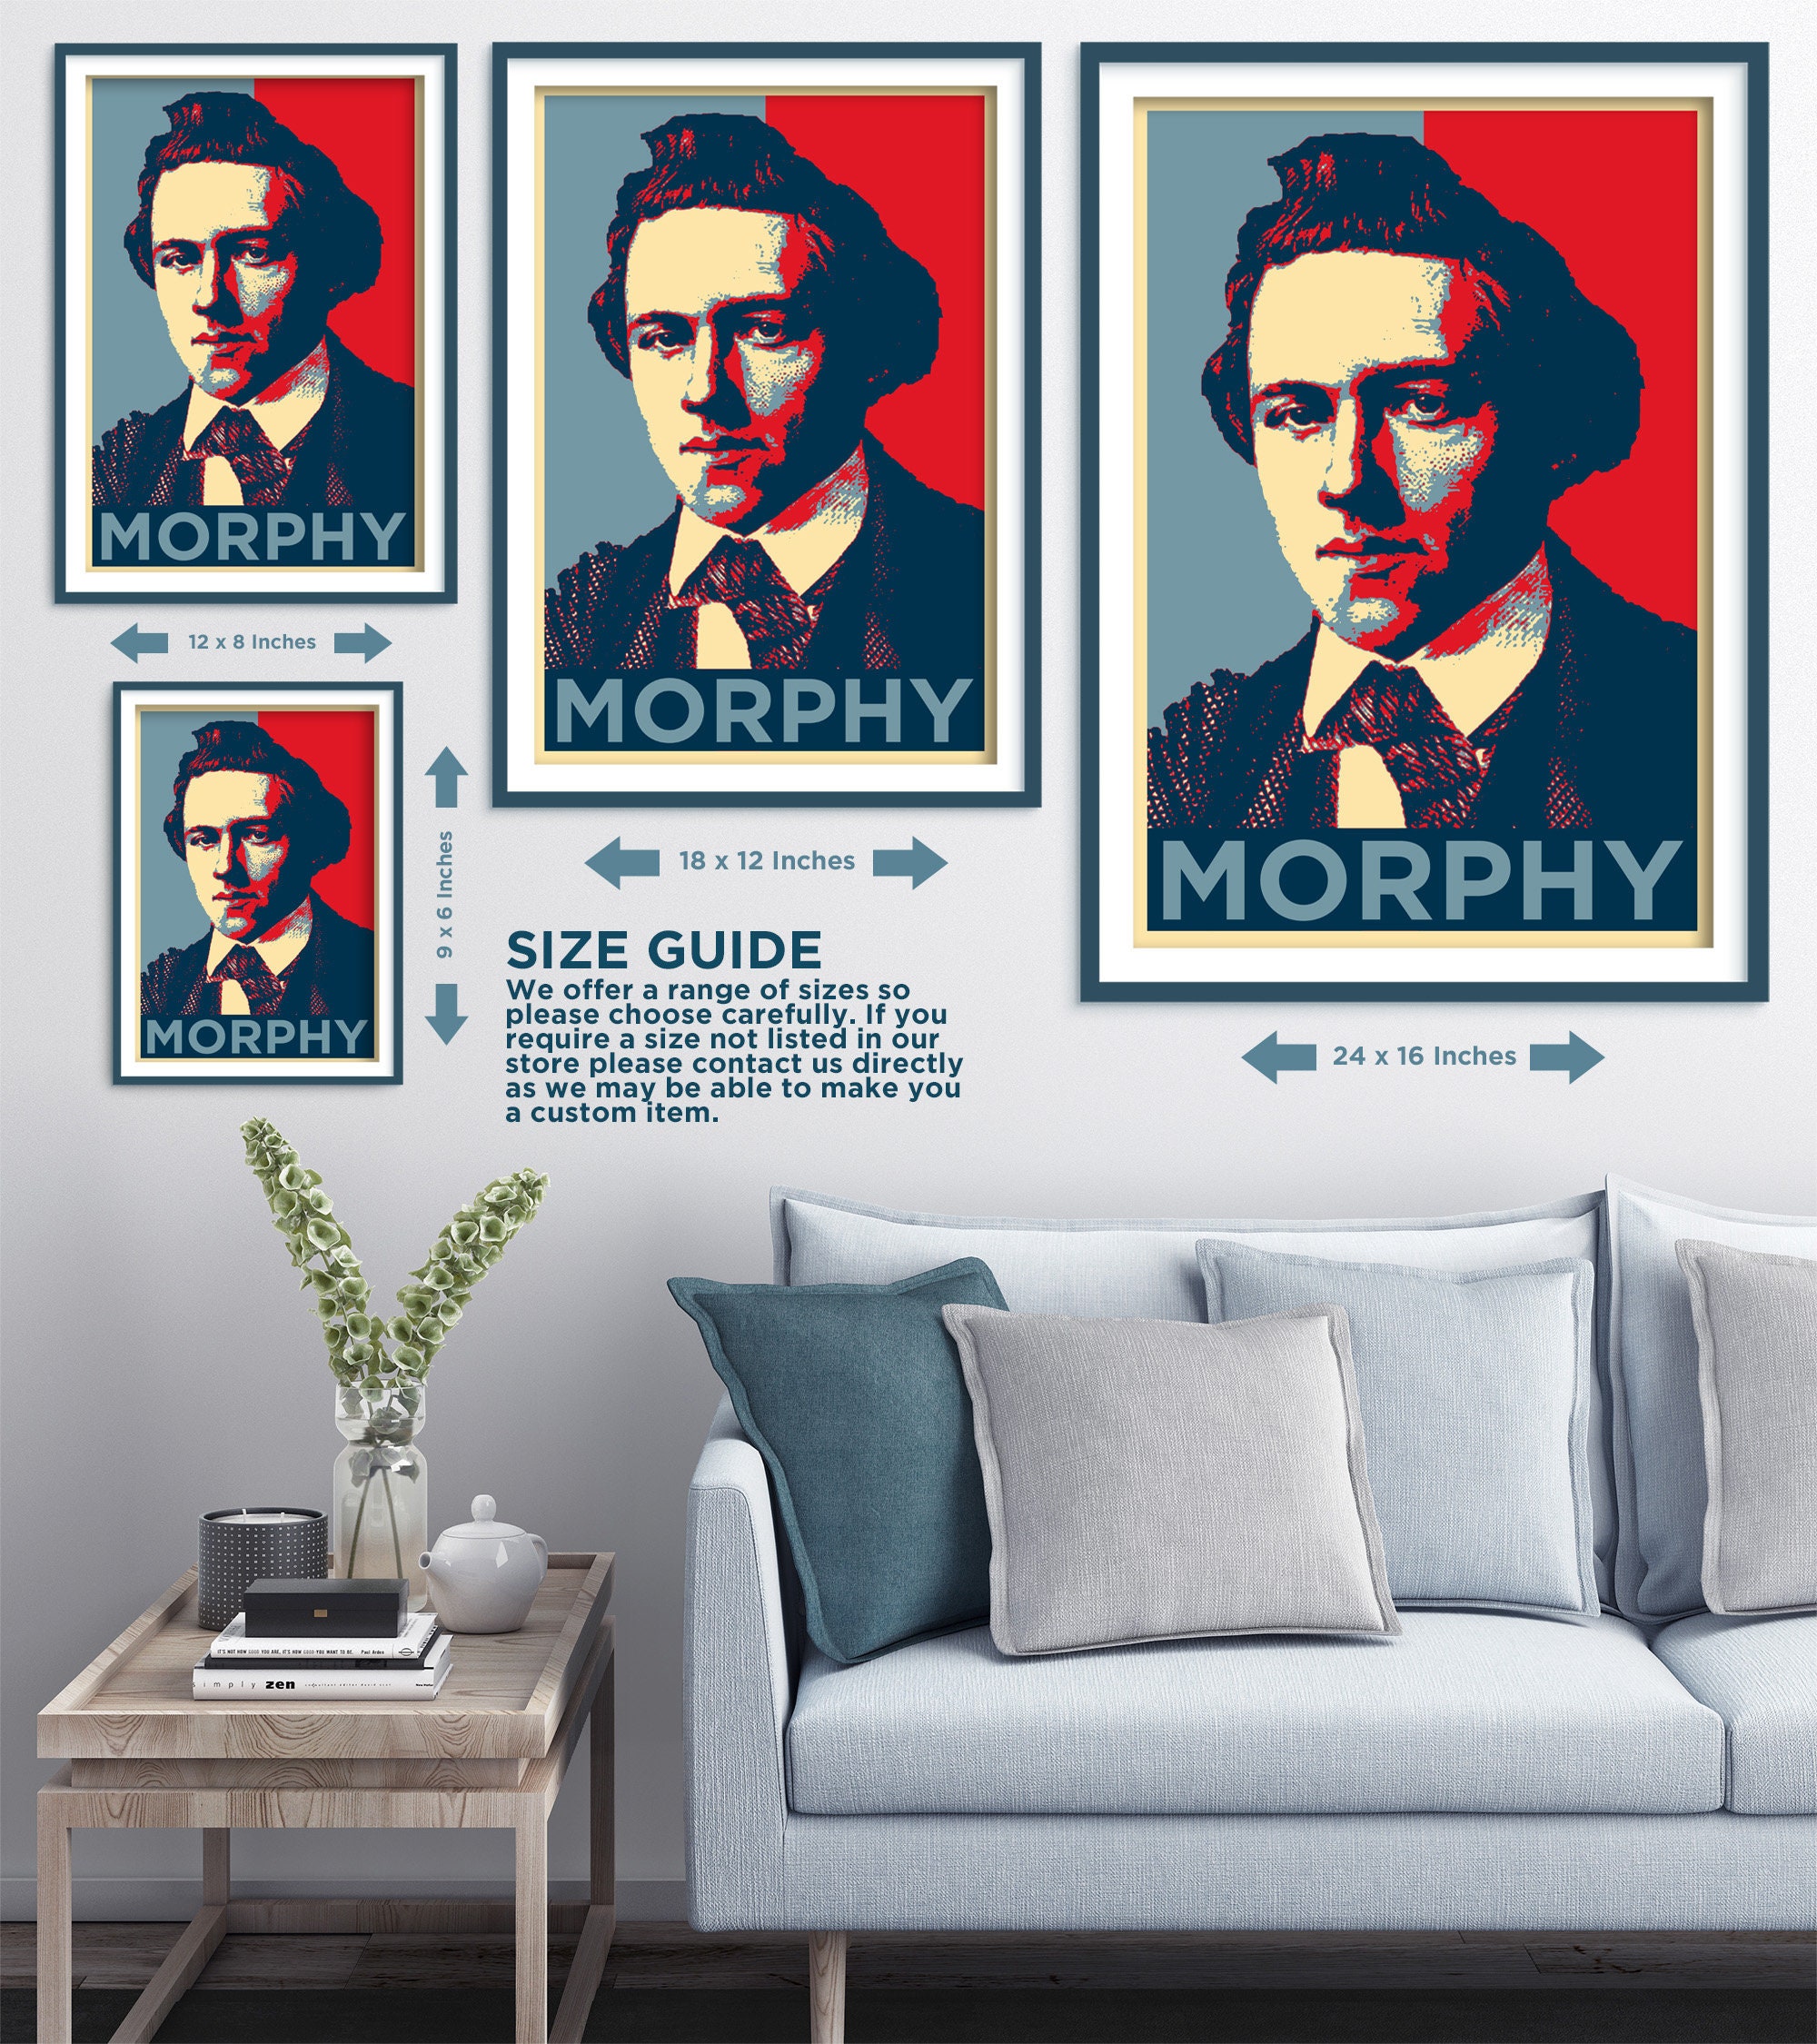 Chess Legends: Paul Morphy Poster